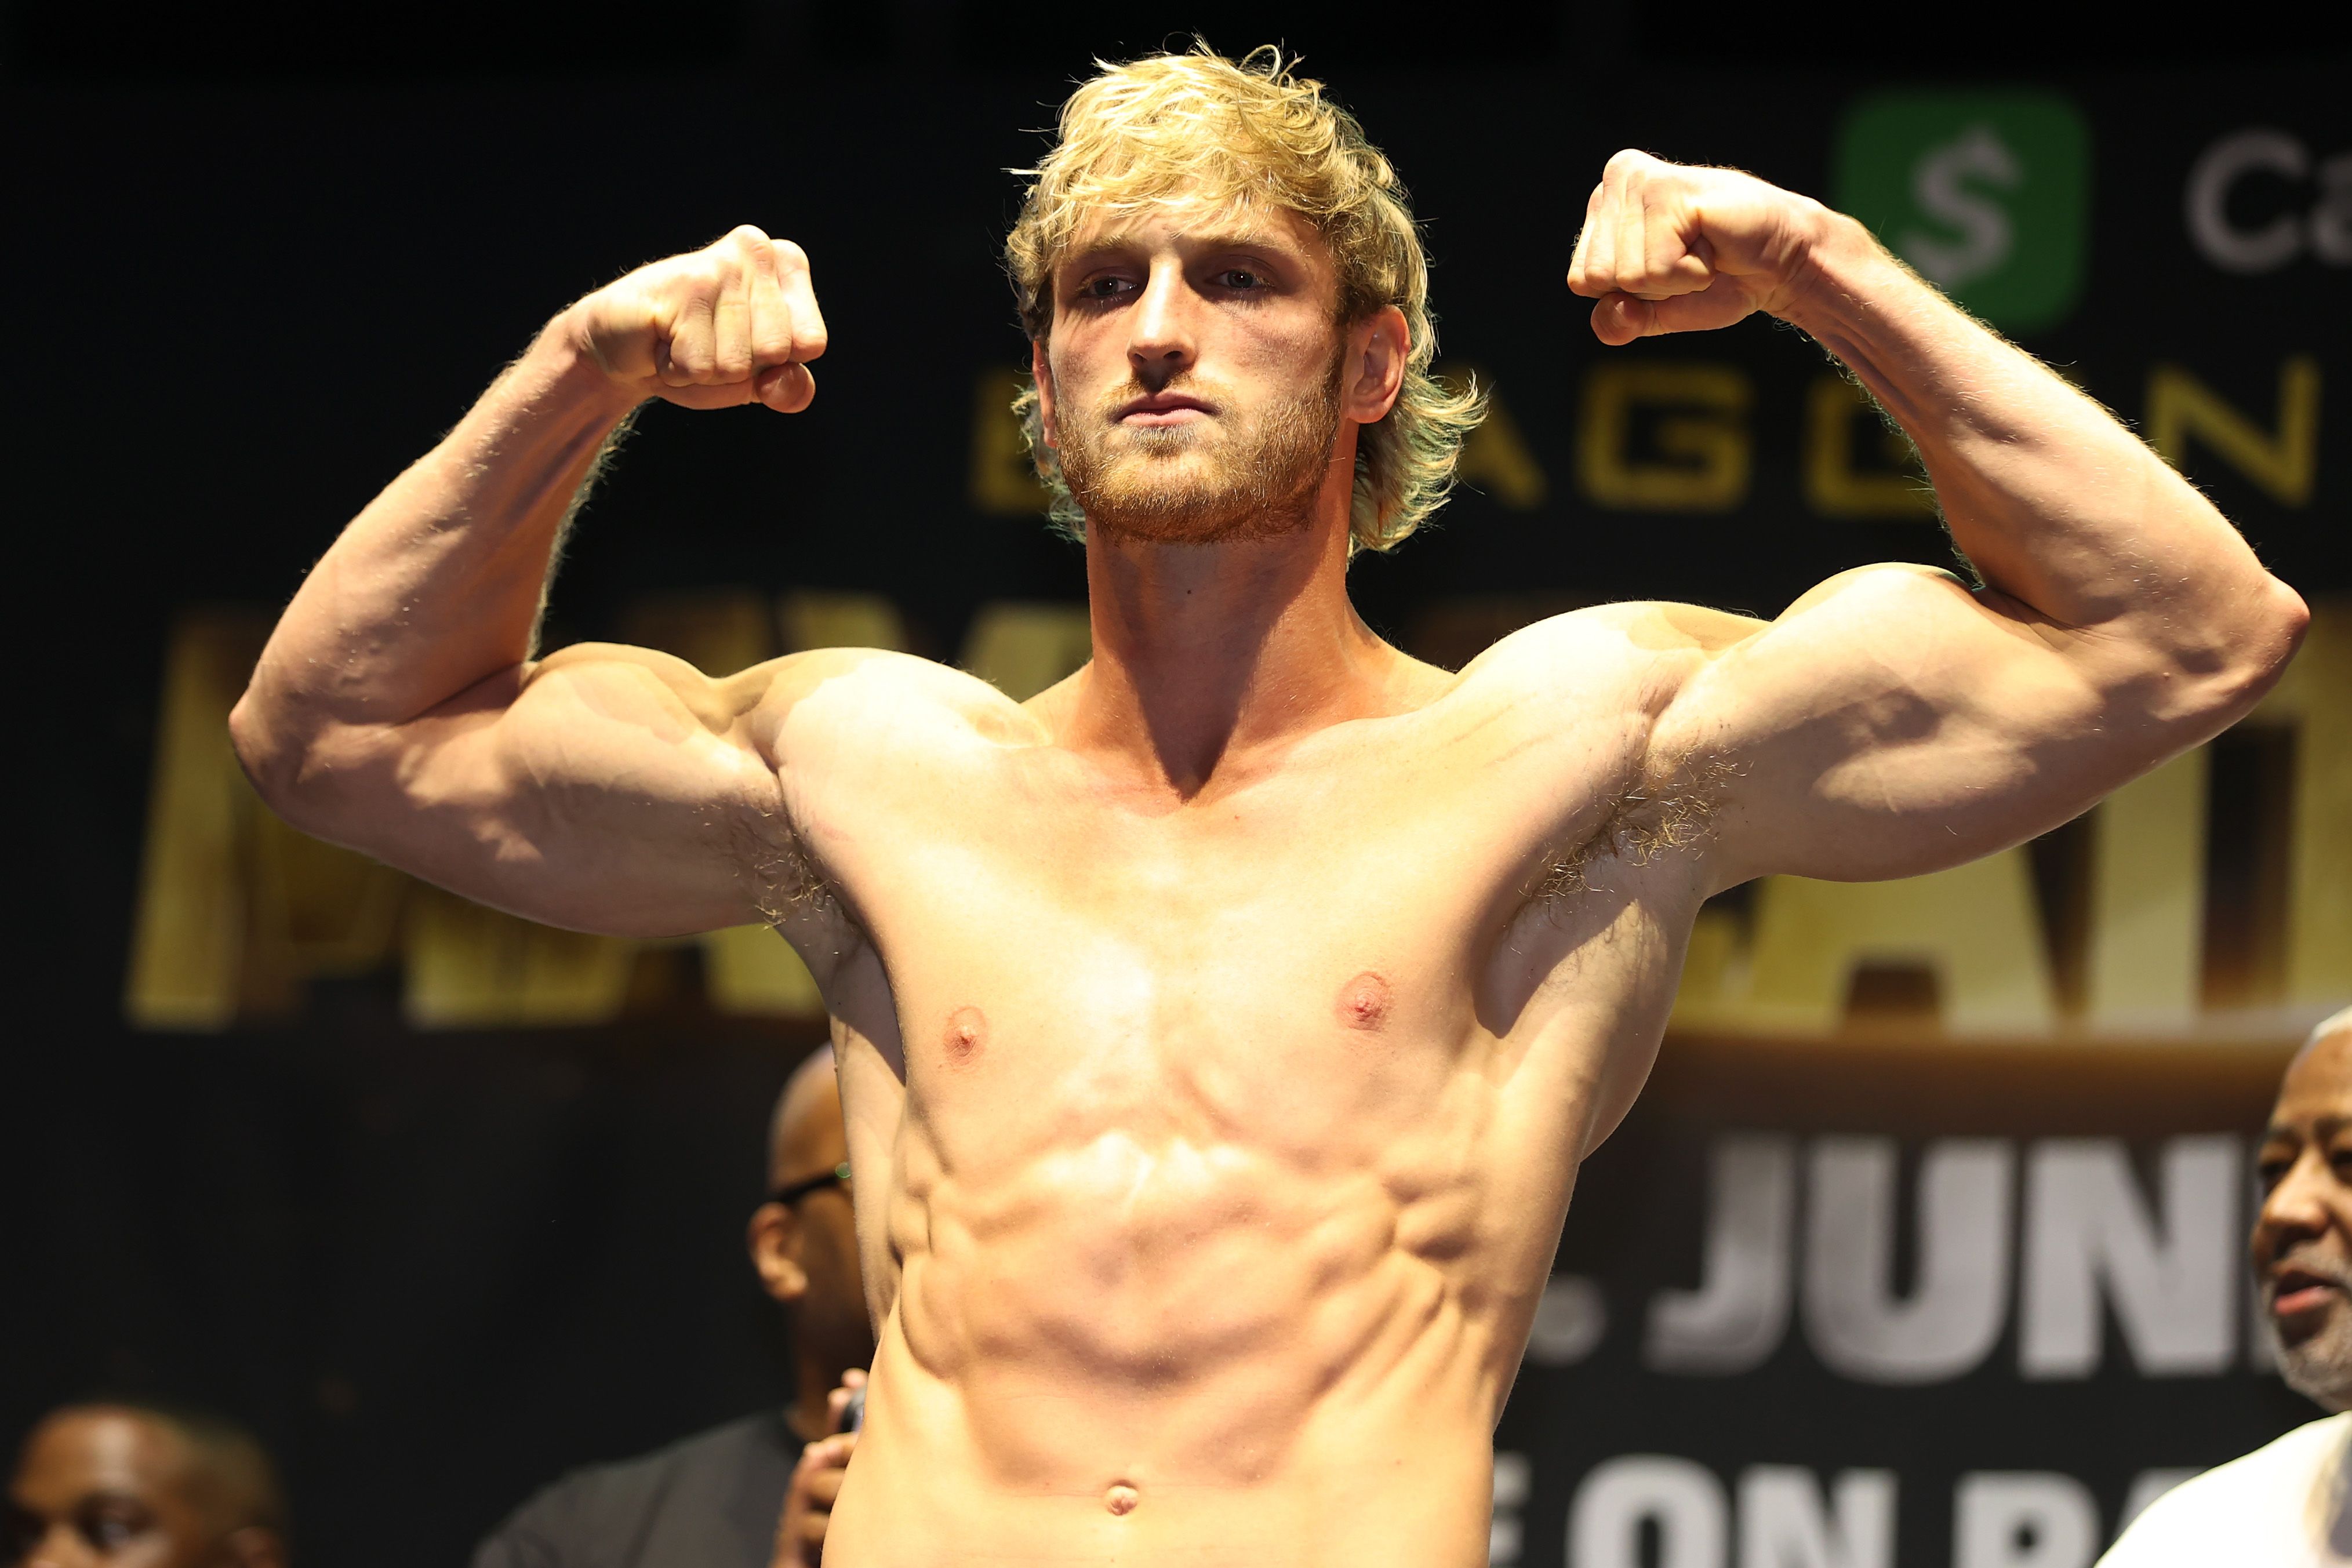 Logan Paul has piled on the pounds since Floyd Mayweather fight &amp; WWE signing